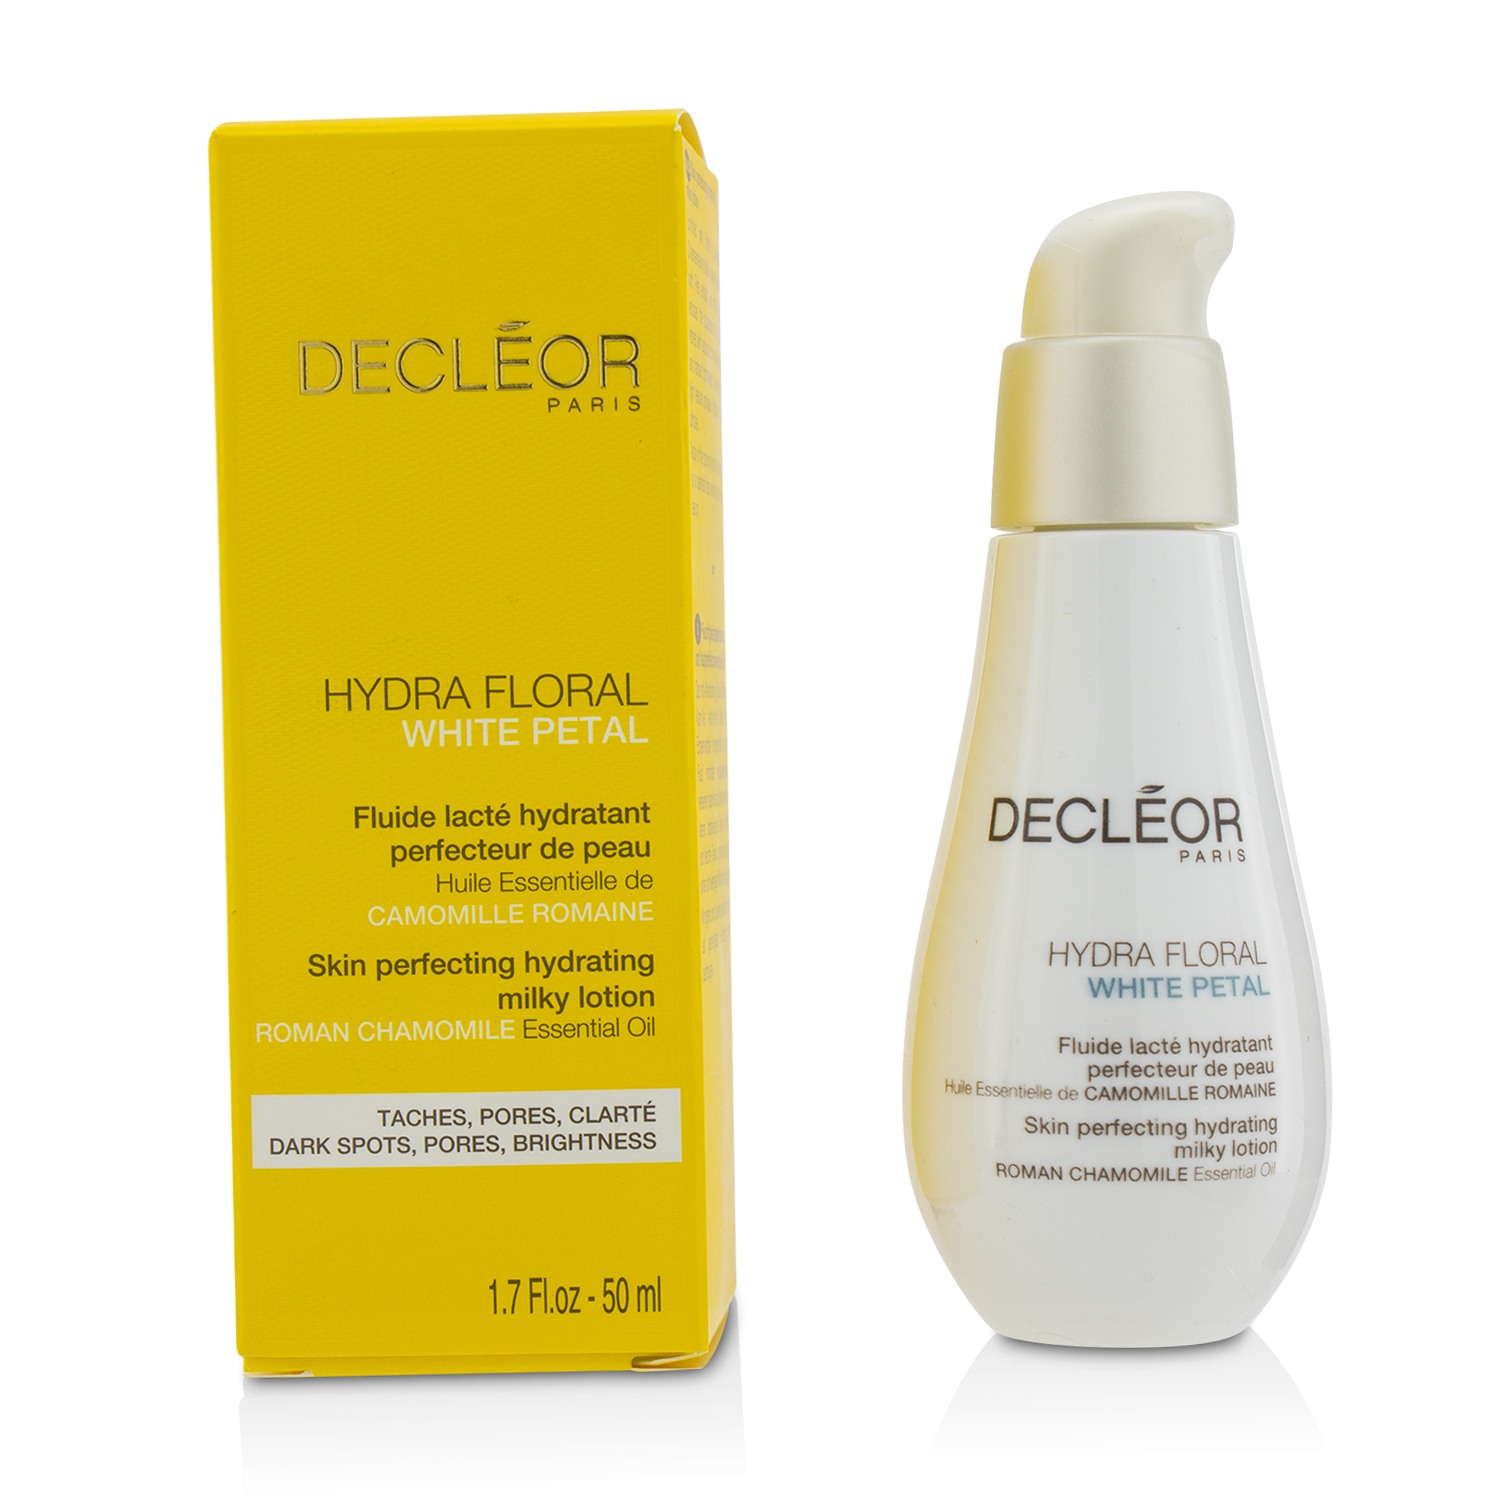 Hydra Floral White Petal Roman Chamomile Skin Perfecting Hydrating Milky Lotion Decleor Image